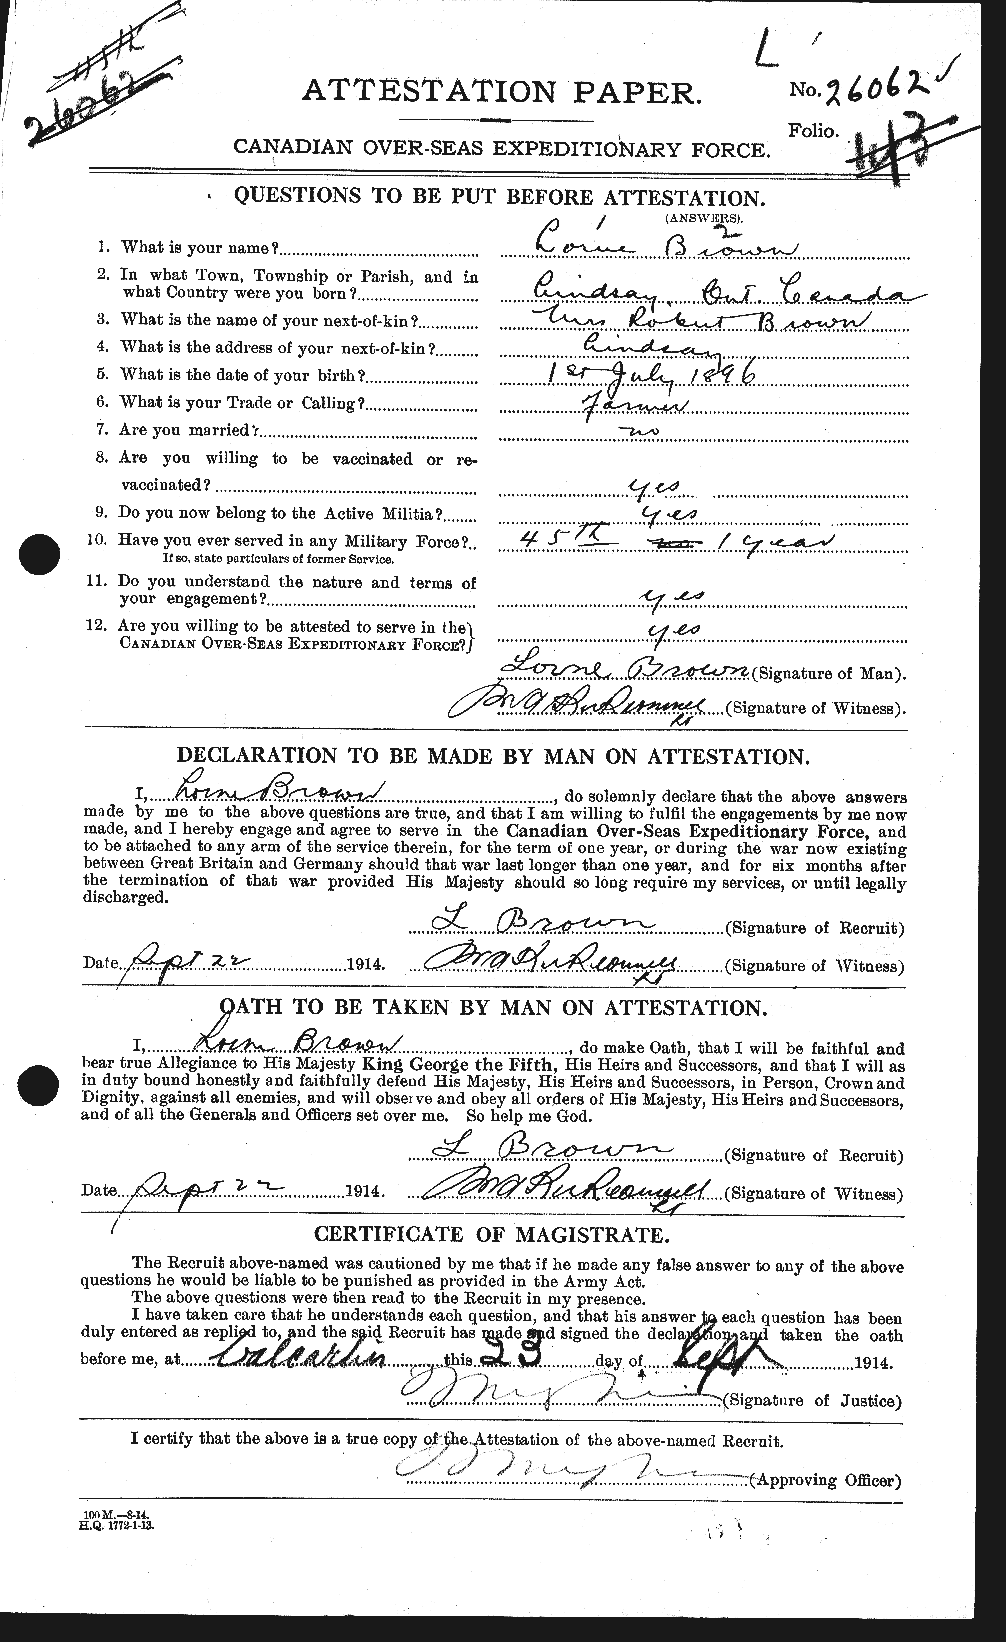 Personnel Records of the First World War - CEF 266331a